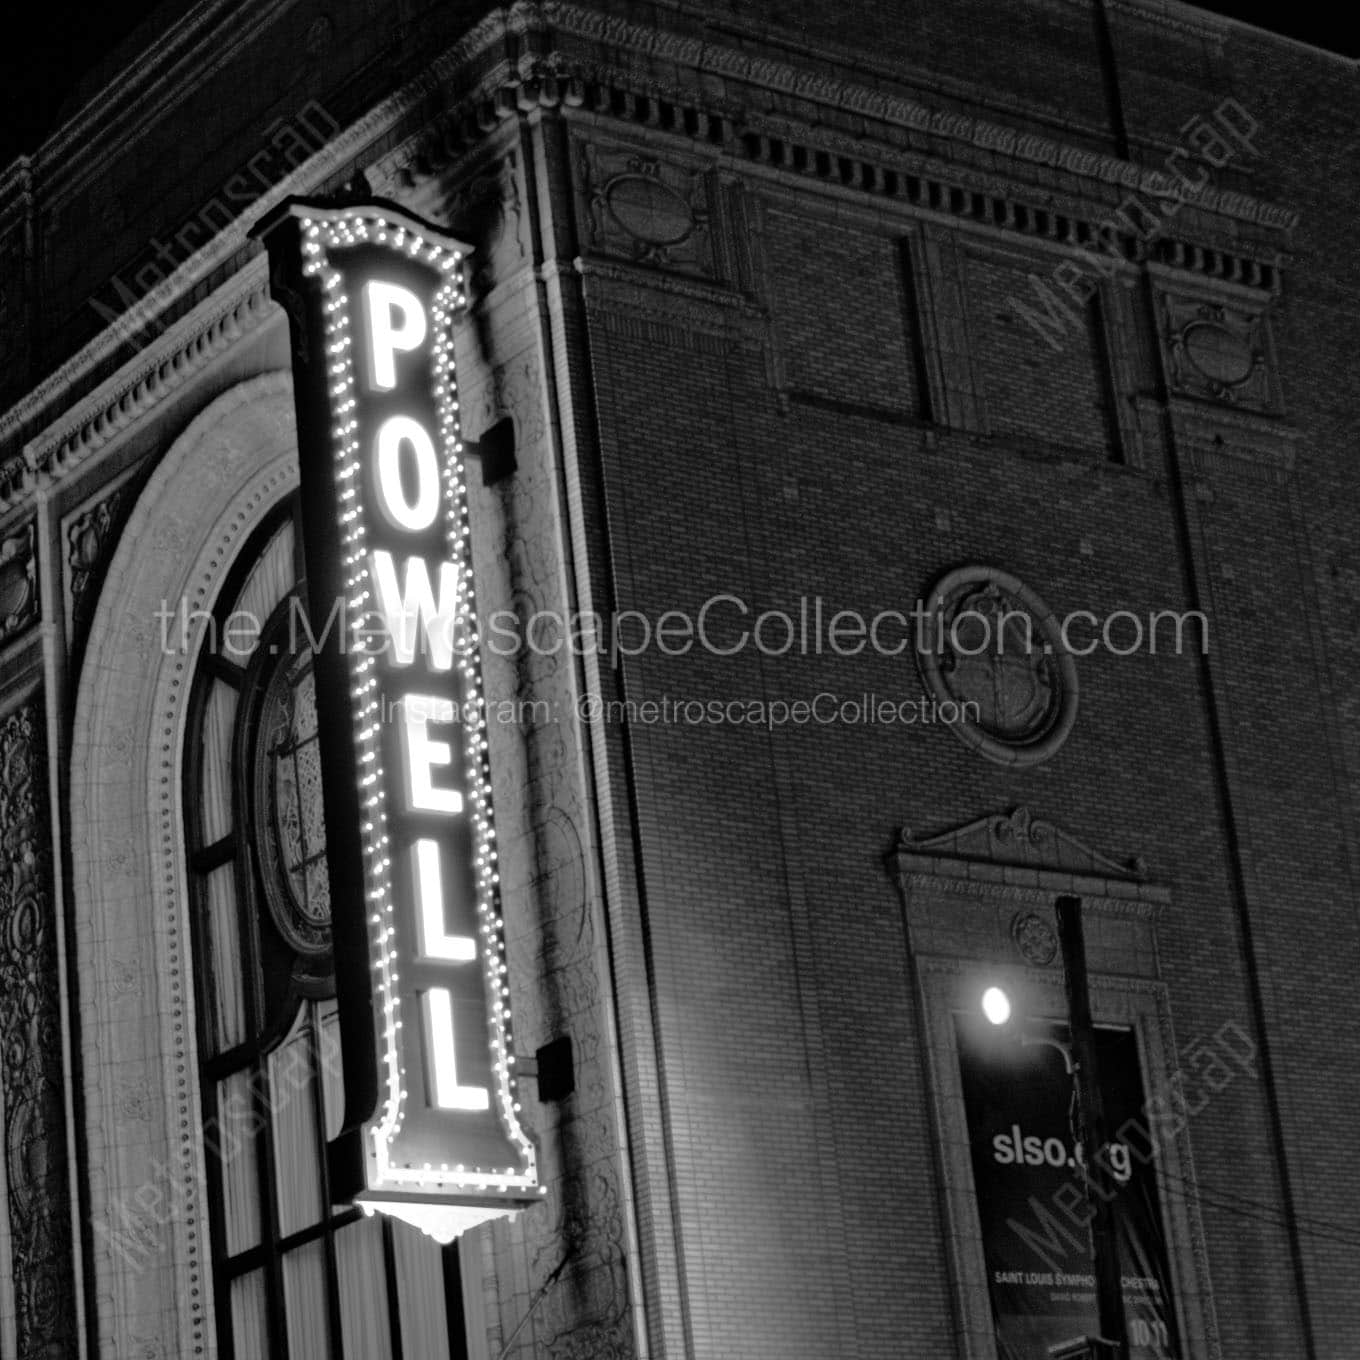 powell theater sign at night Black & White Office Art